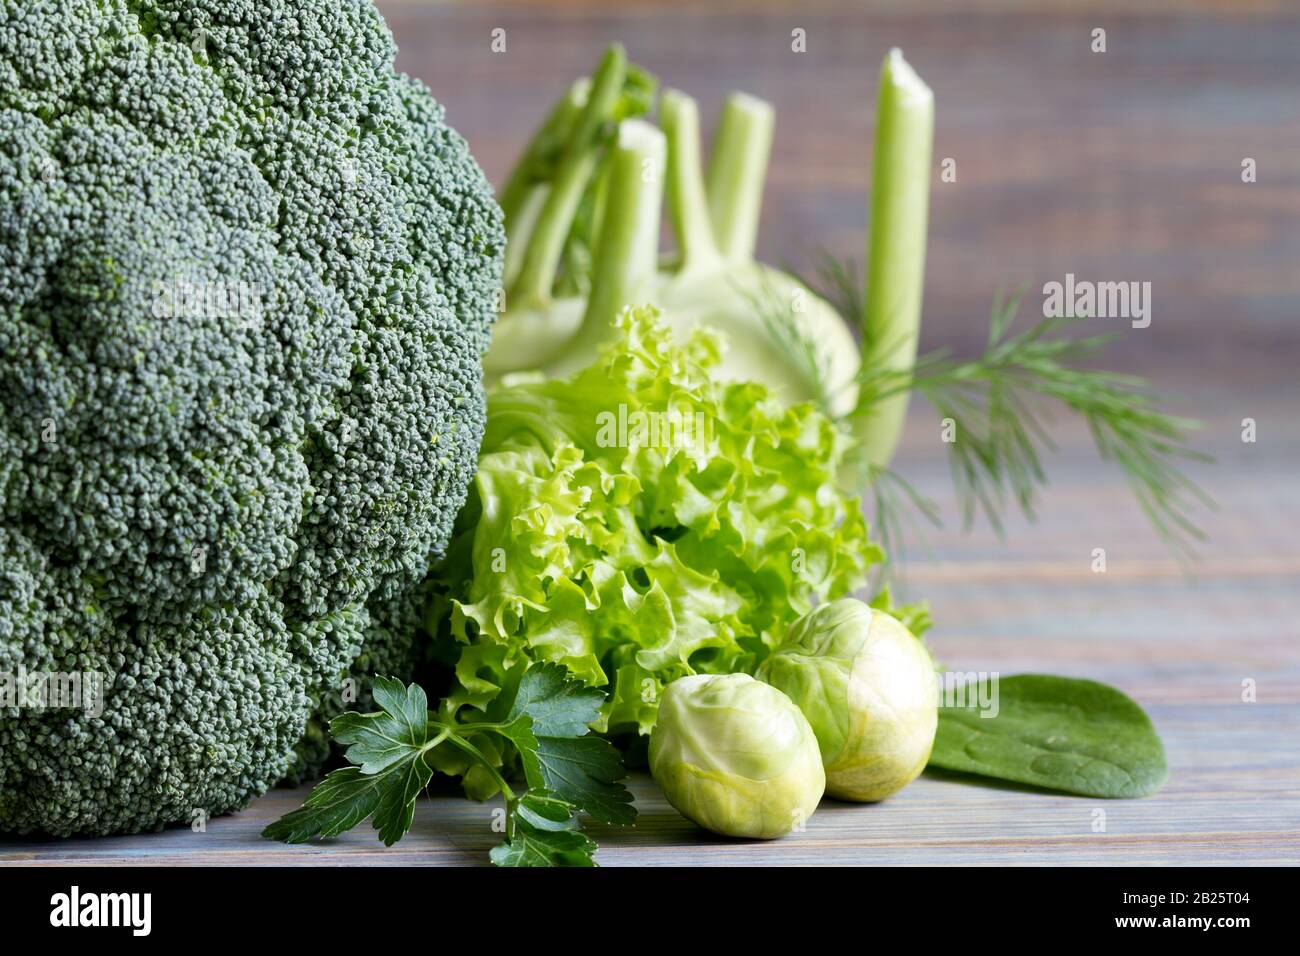 Green health vegetables on wooden table food still life Stock Photo